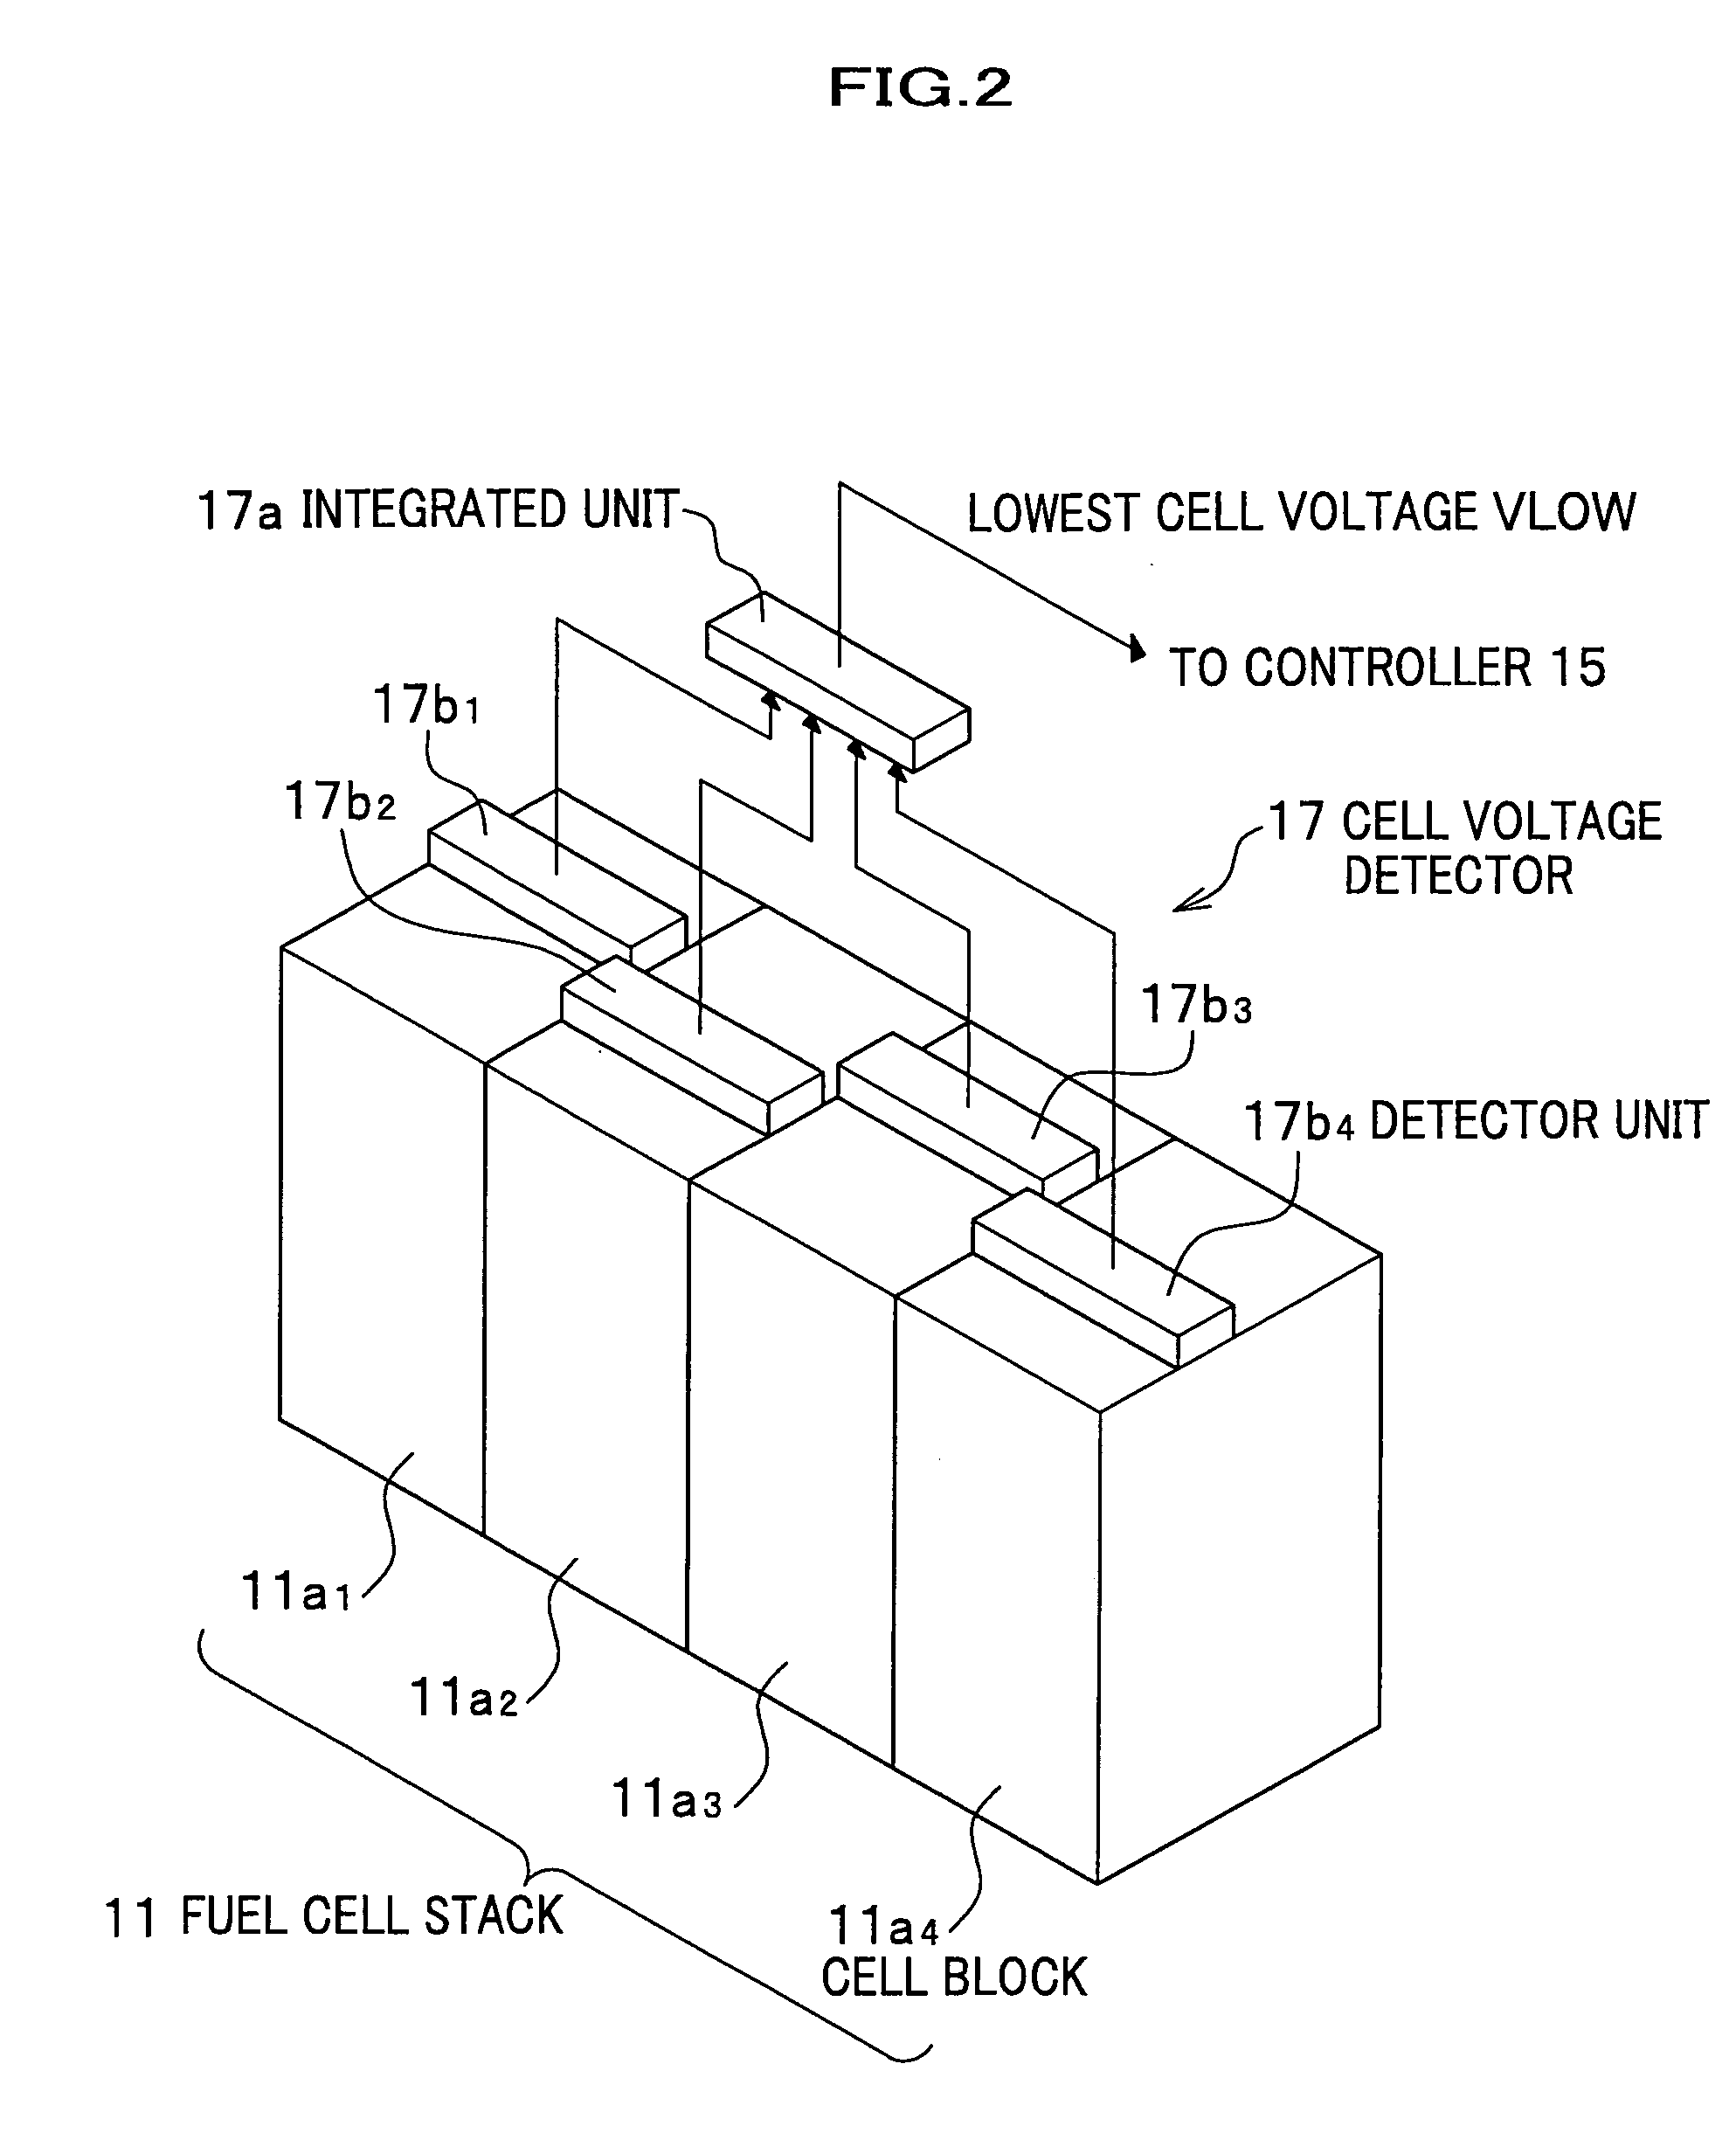 Current limiting system and current limiting method for fuel cells